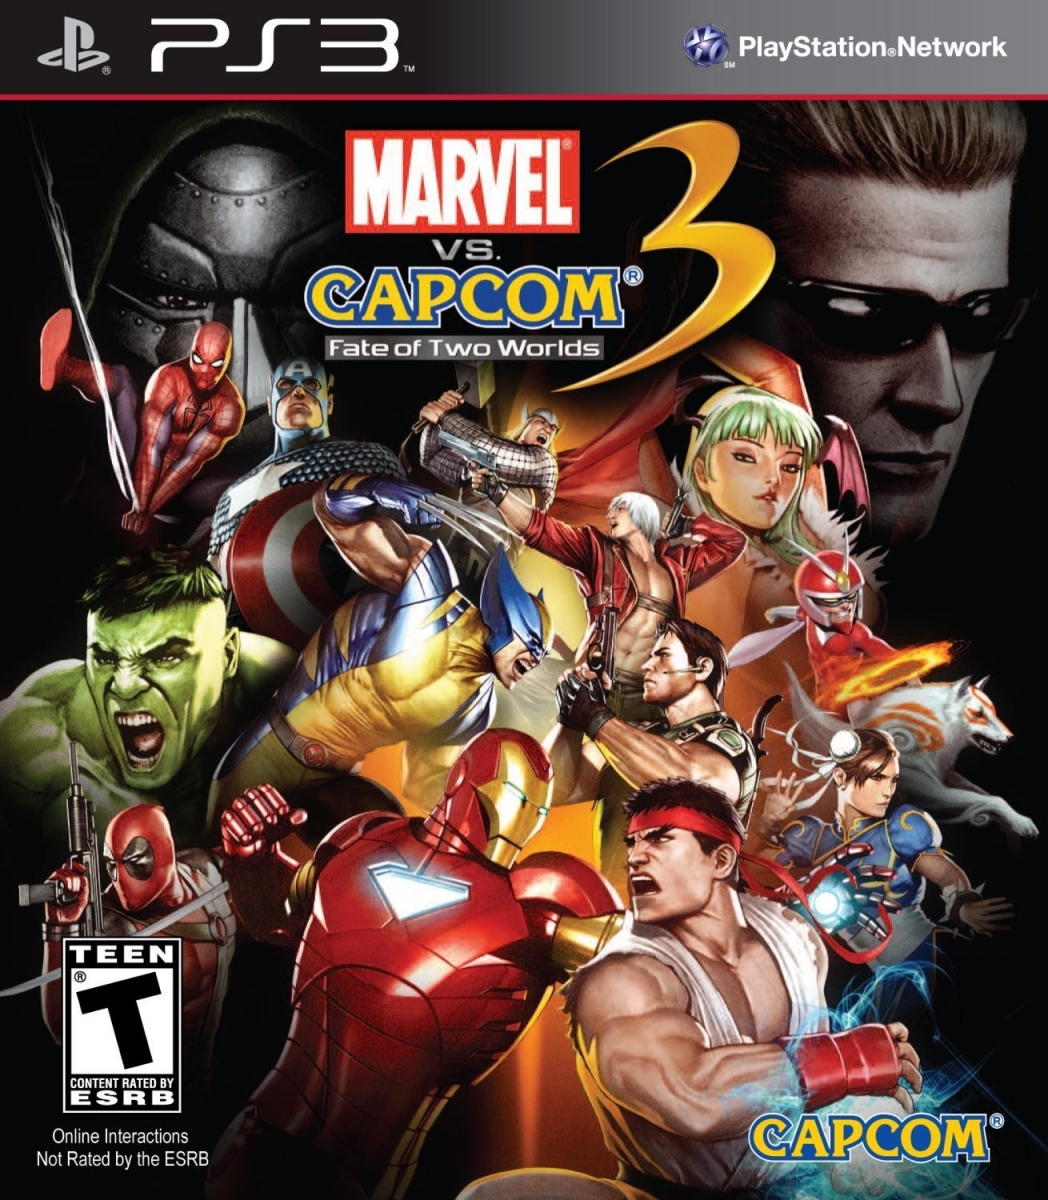 Marvel Vs Capcom 3 Fate of Two Worlds PS3